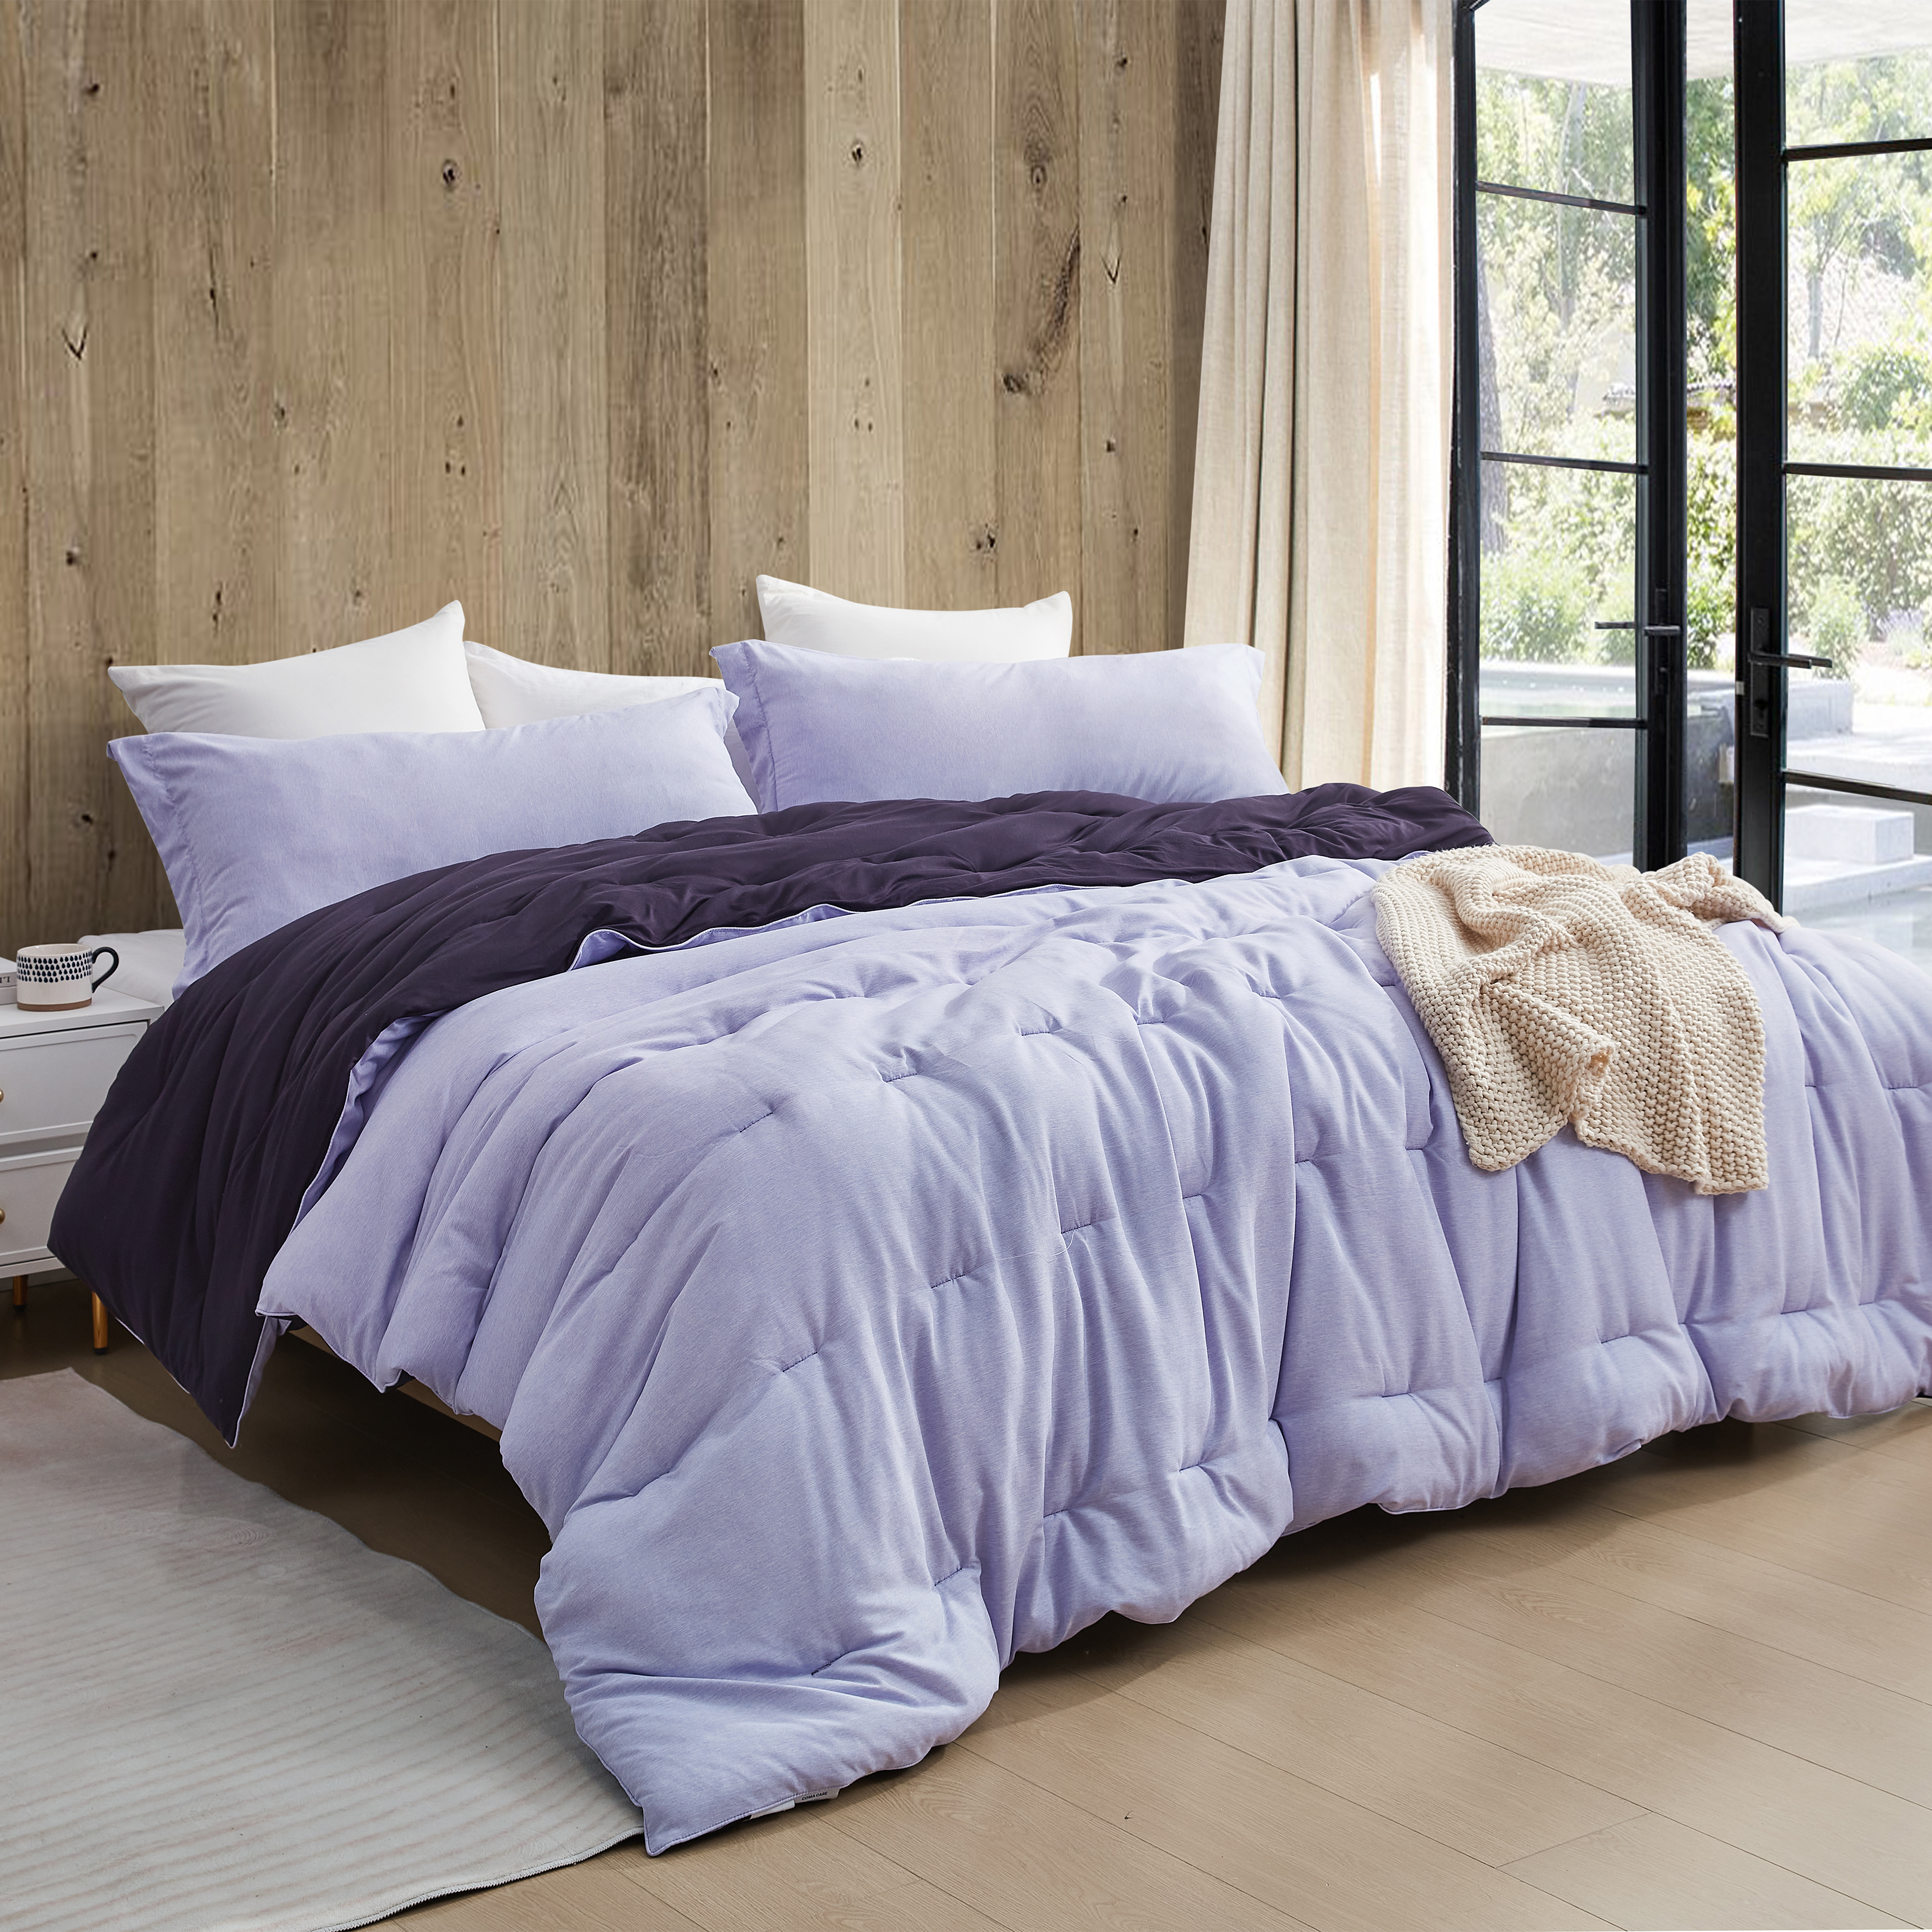 Yoga Pants - Coma Inducer® Oversized Queen Cooling Comforter - Sweet Lavender x Midnight Purple